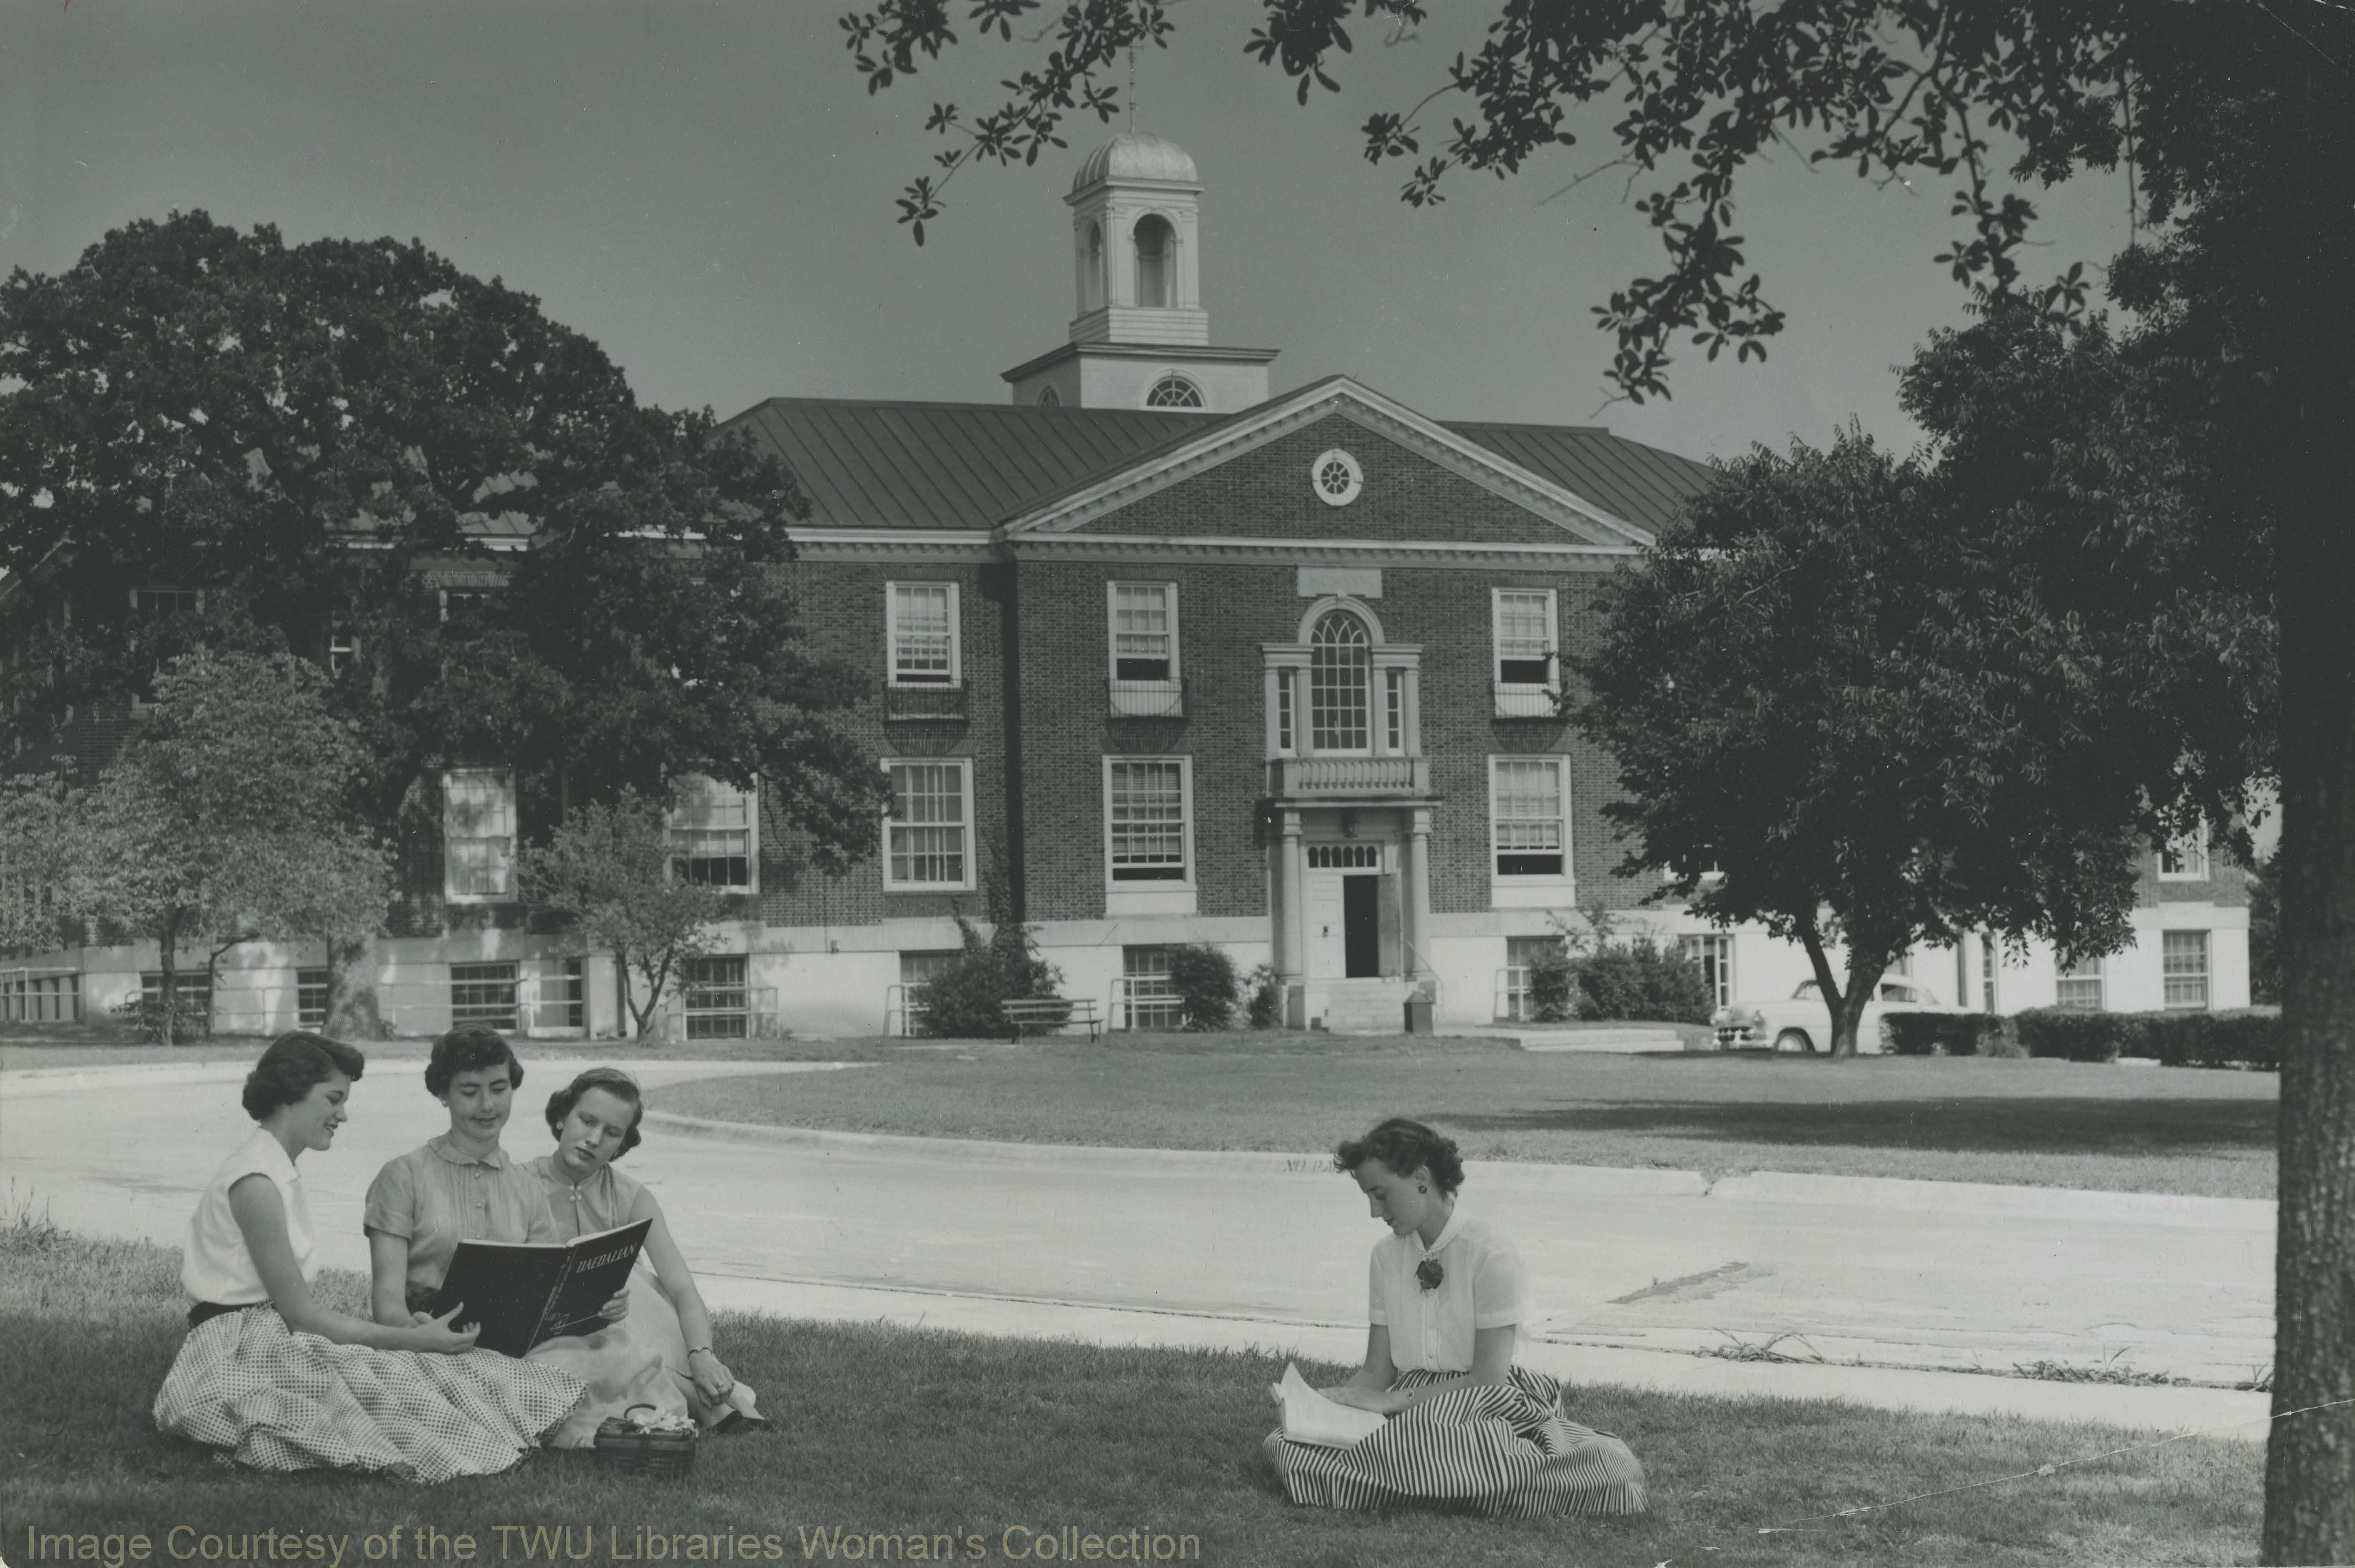 Students looking at a Daedalian yearbook in front of the west side of Bralley Memorial Library. Bralley opened in 1927 and was demolished in 1996. (Photo:1950s, Courtesy TWU Woman's Collection)